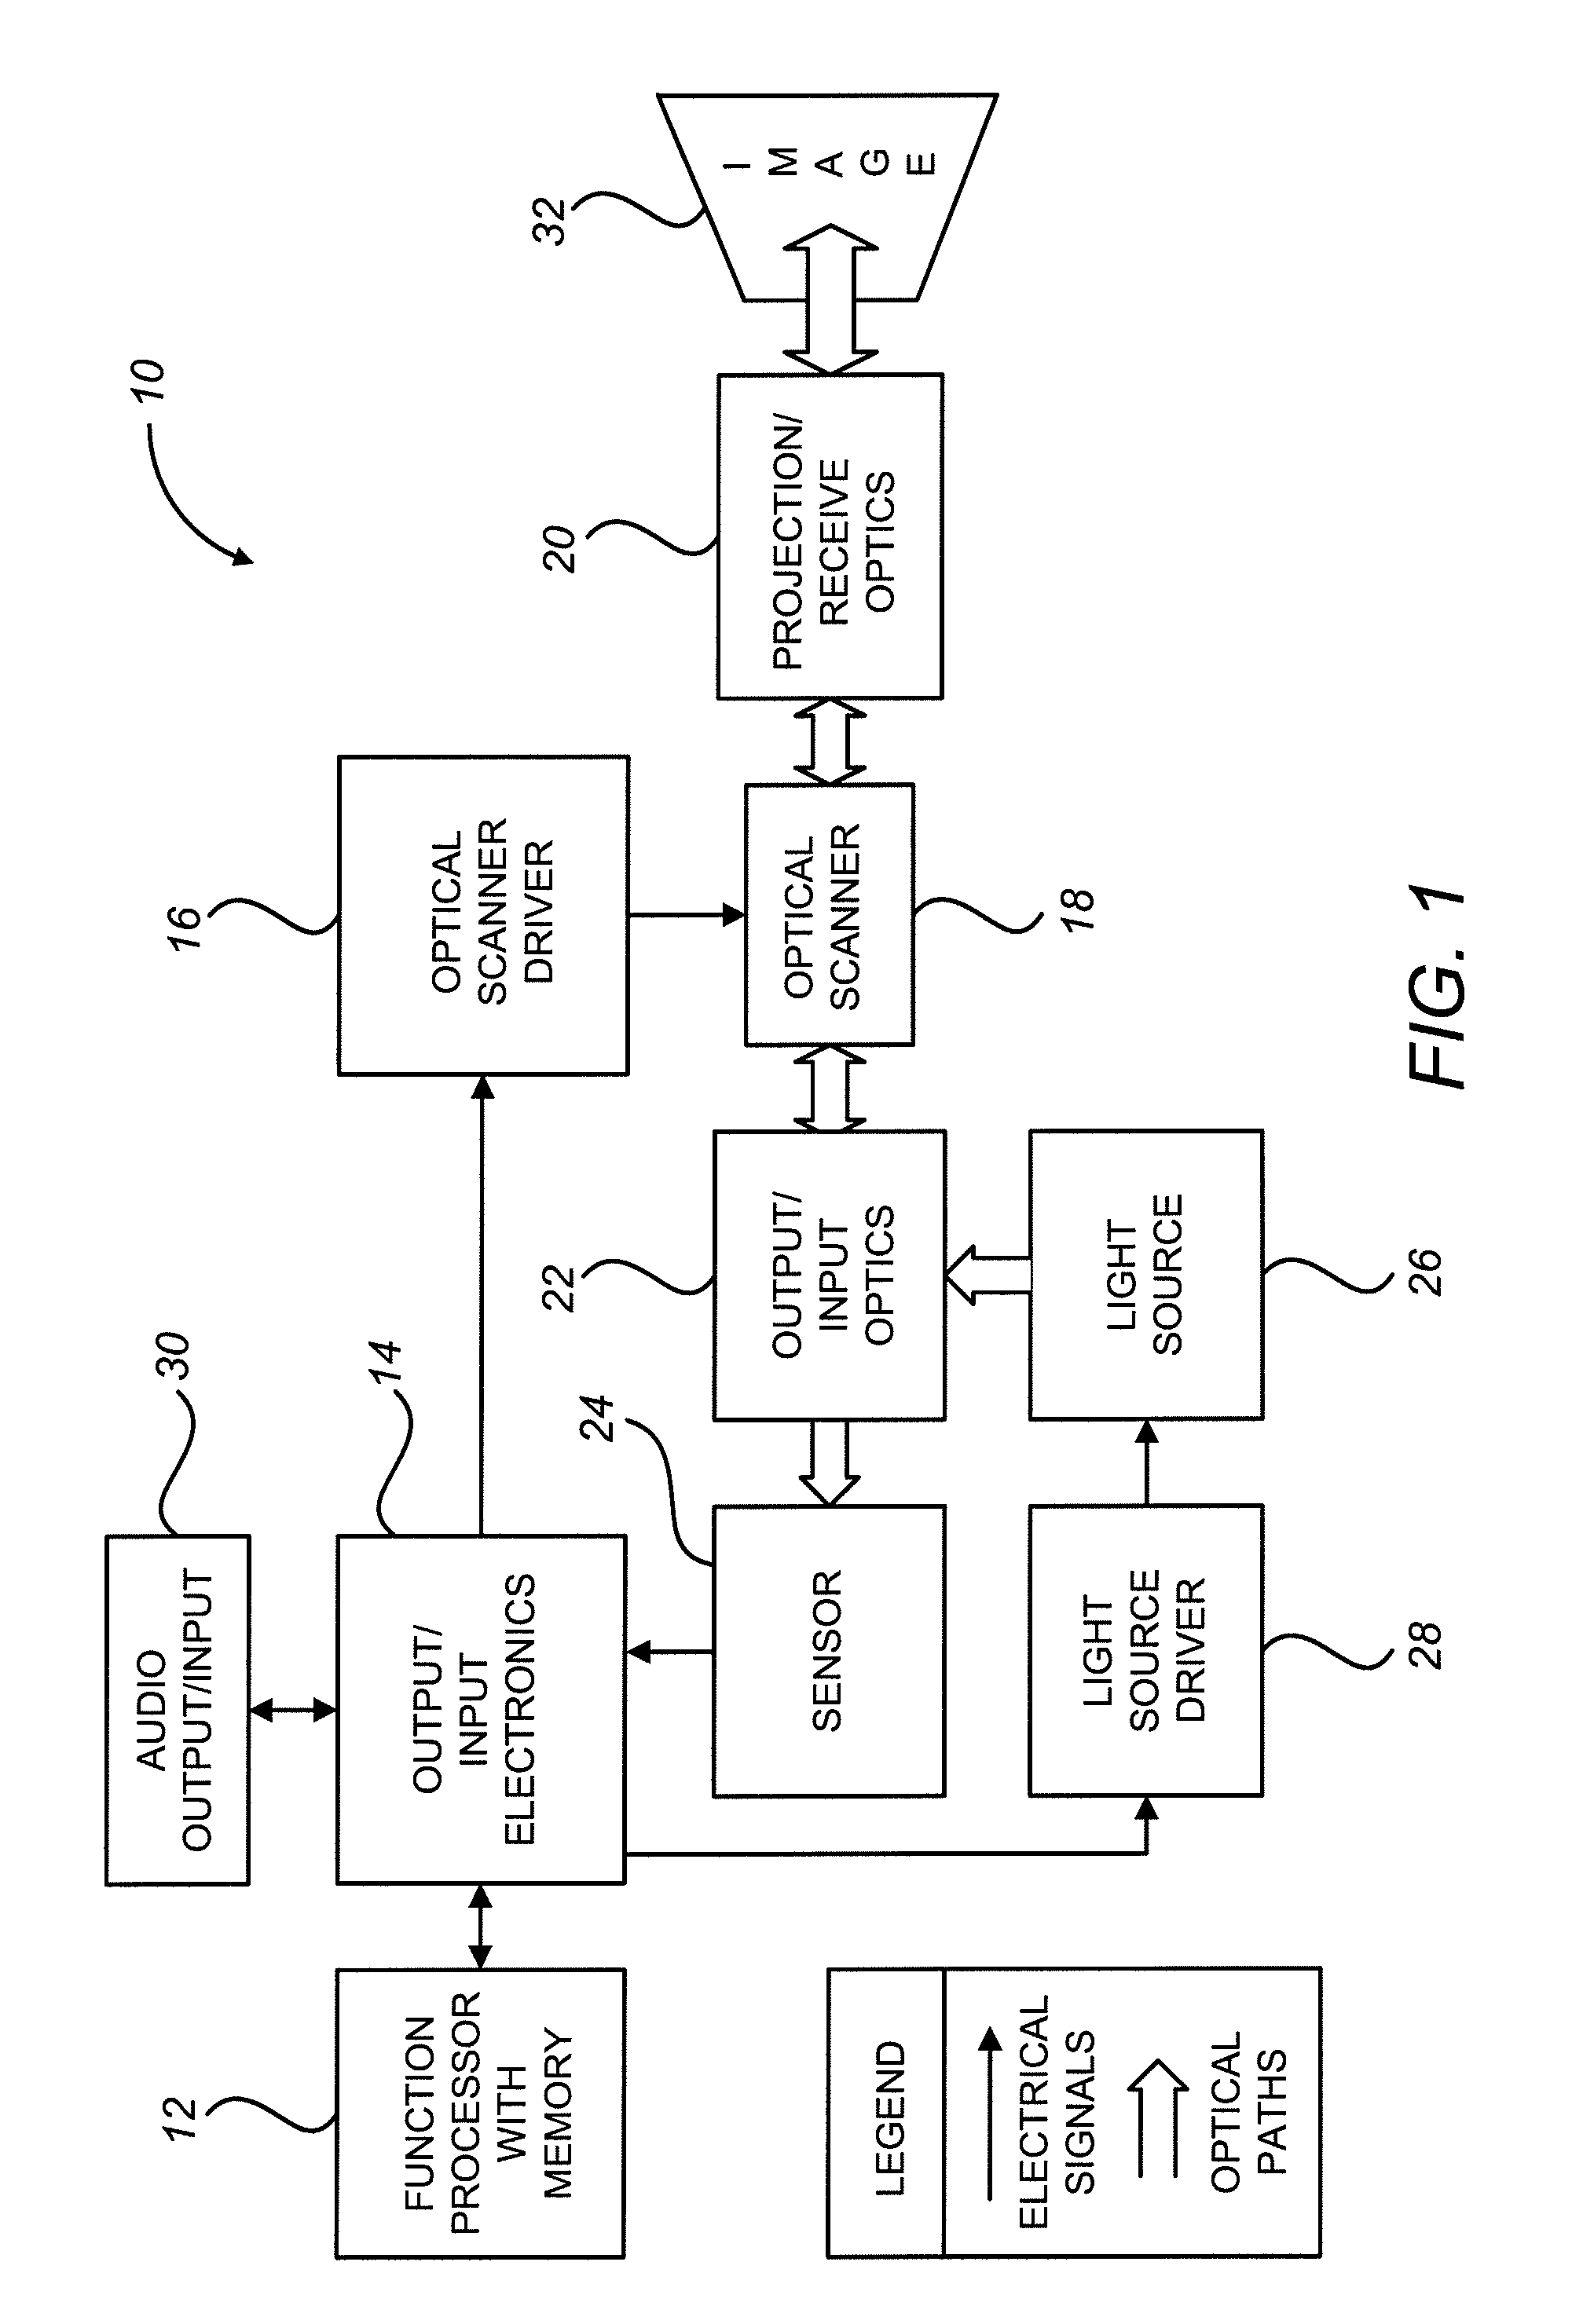 Scanning laser projection display devices and methods for projecting one or more images onto a surface with a light-scanning optical fiber